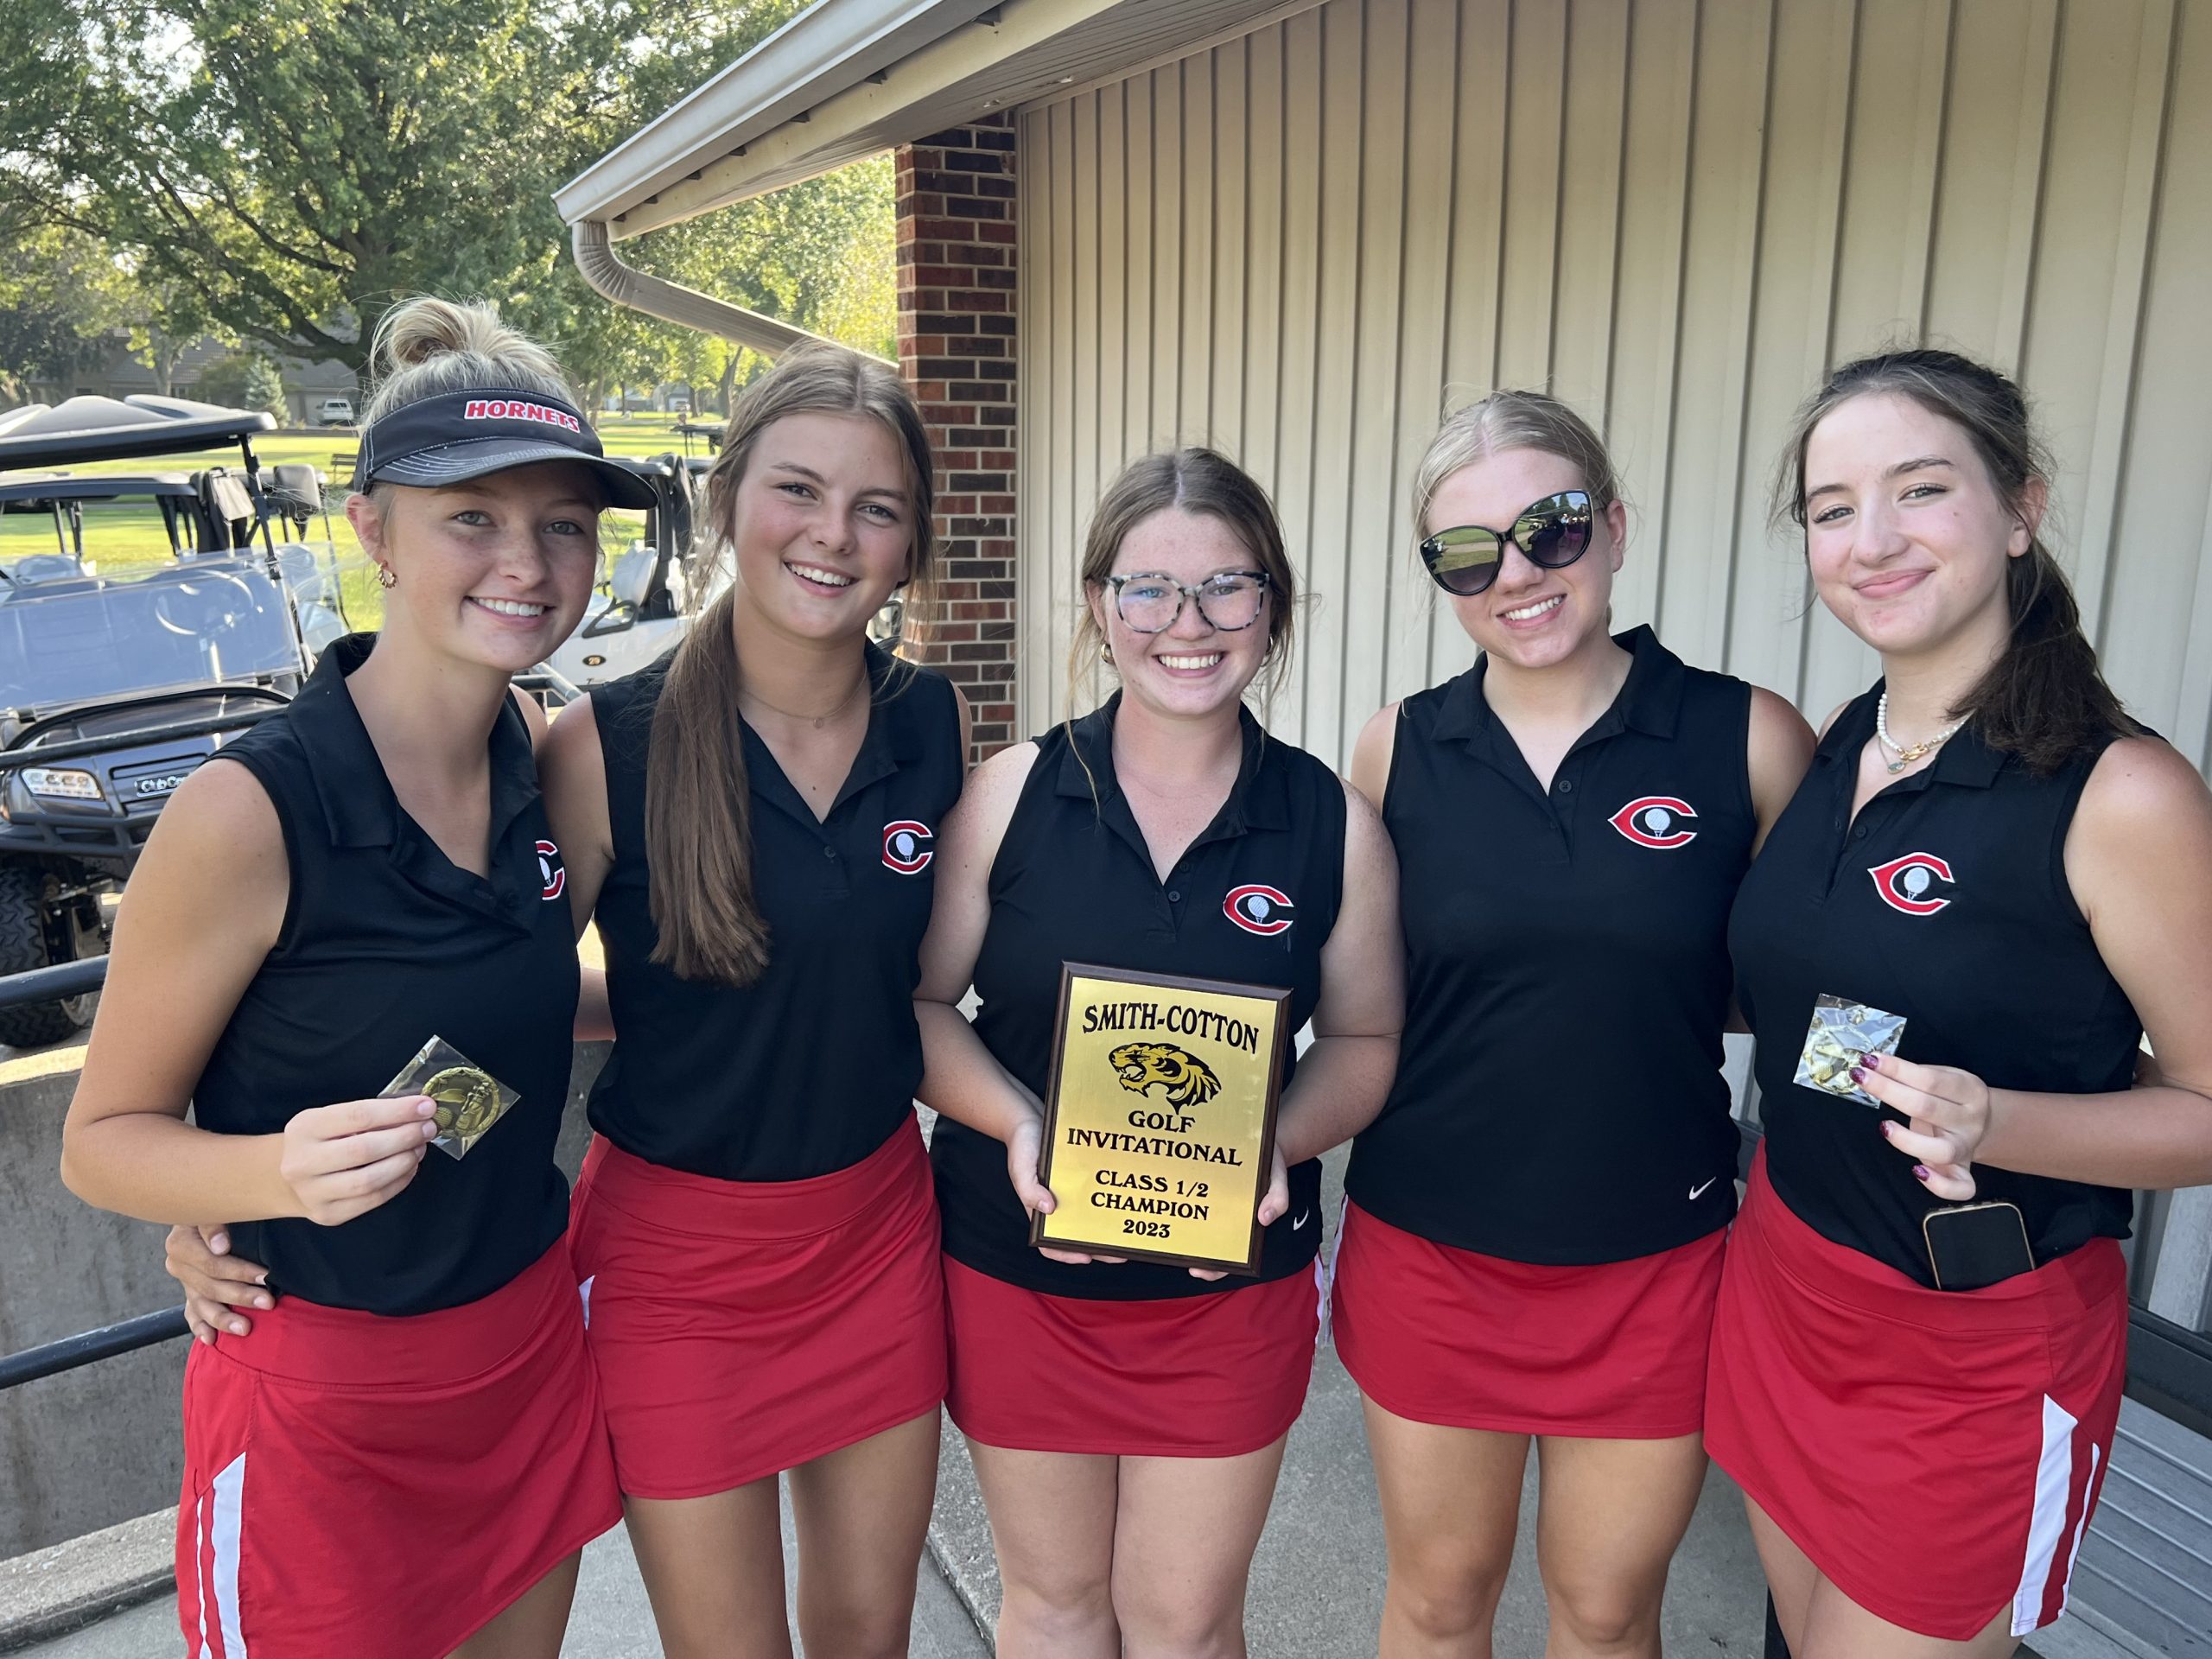 Chillicothe Girls Golf Places 1st in Class 1/2 Bracket at the Smith-Cotton Classic in Sedalia